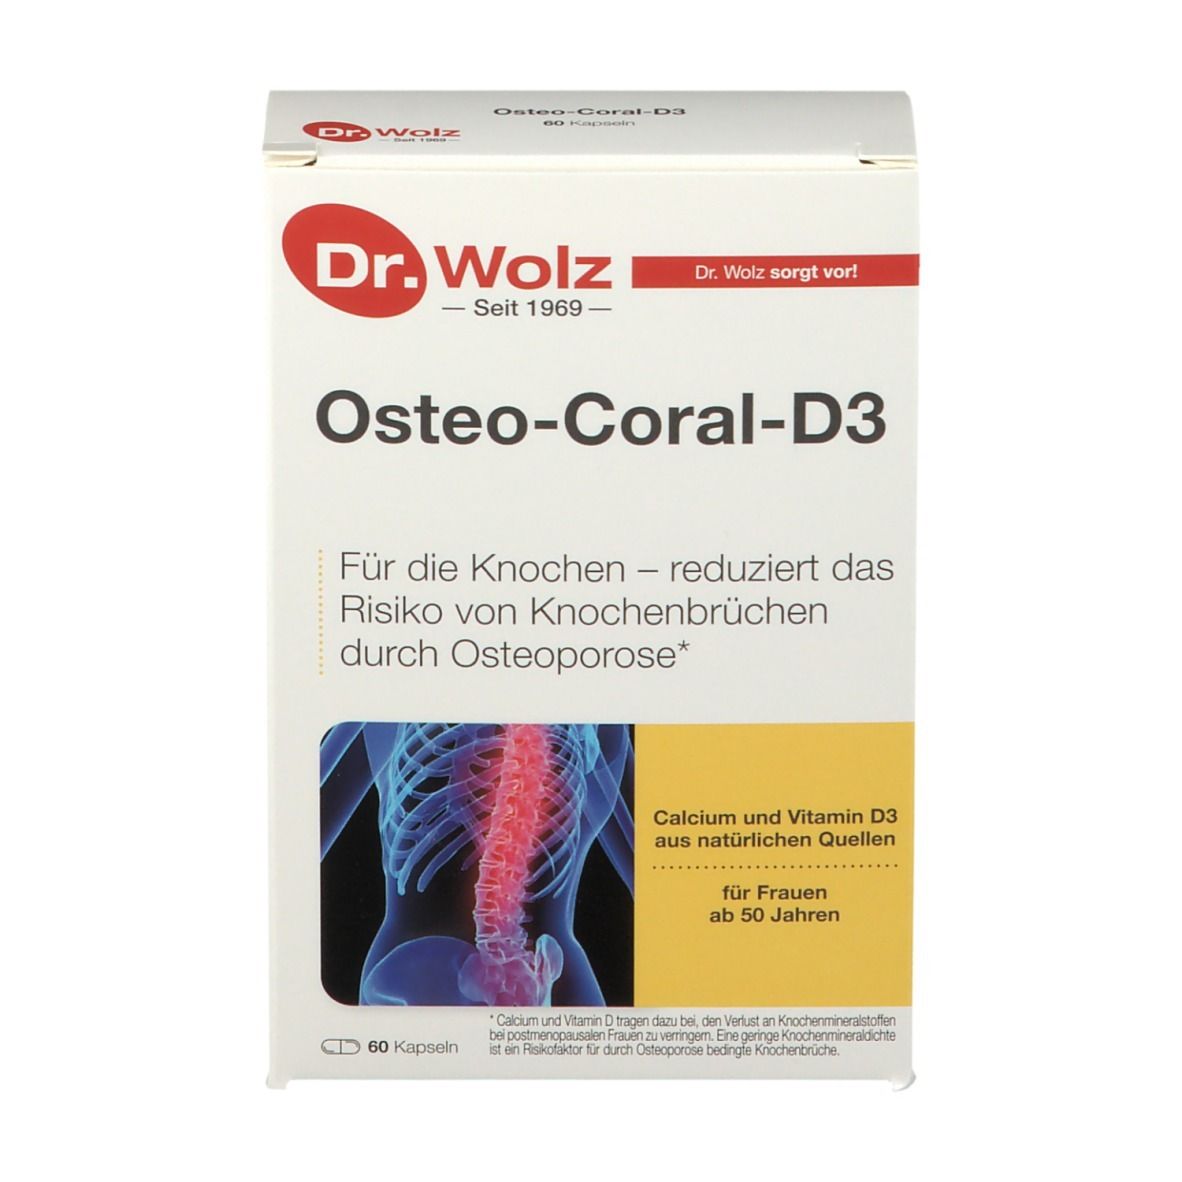 Dr. Wolz Osteo-Coral-D3